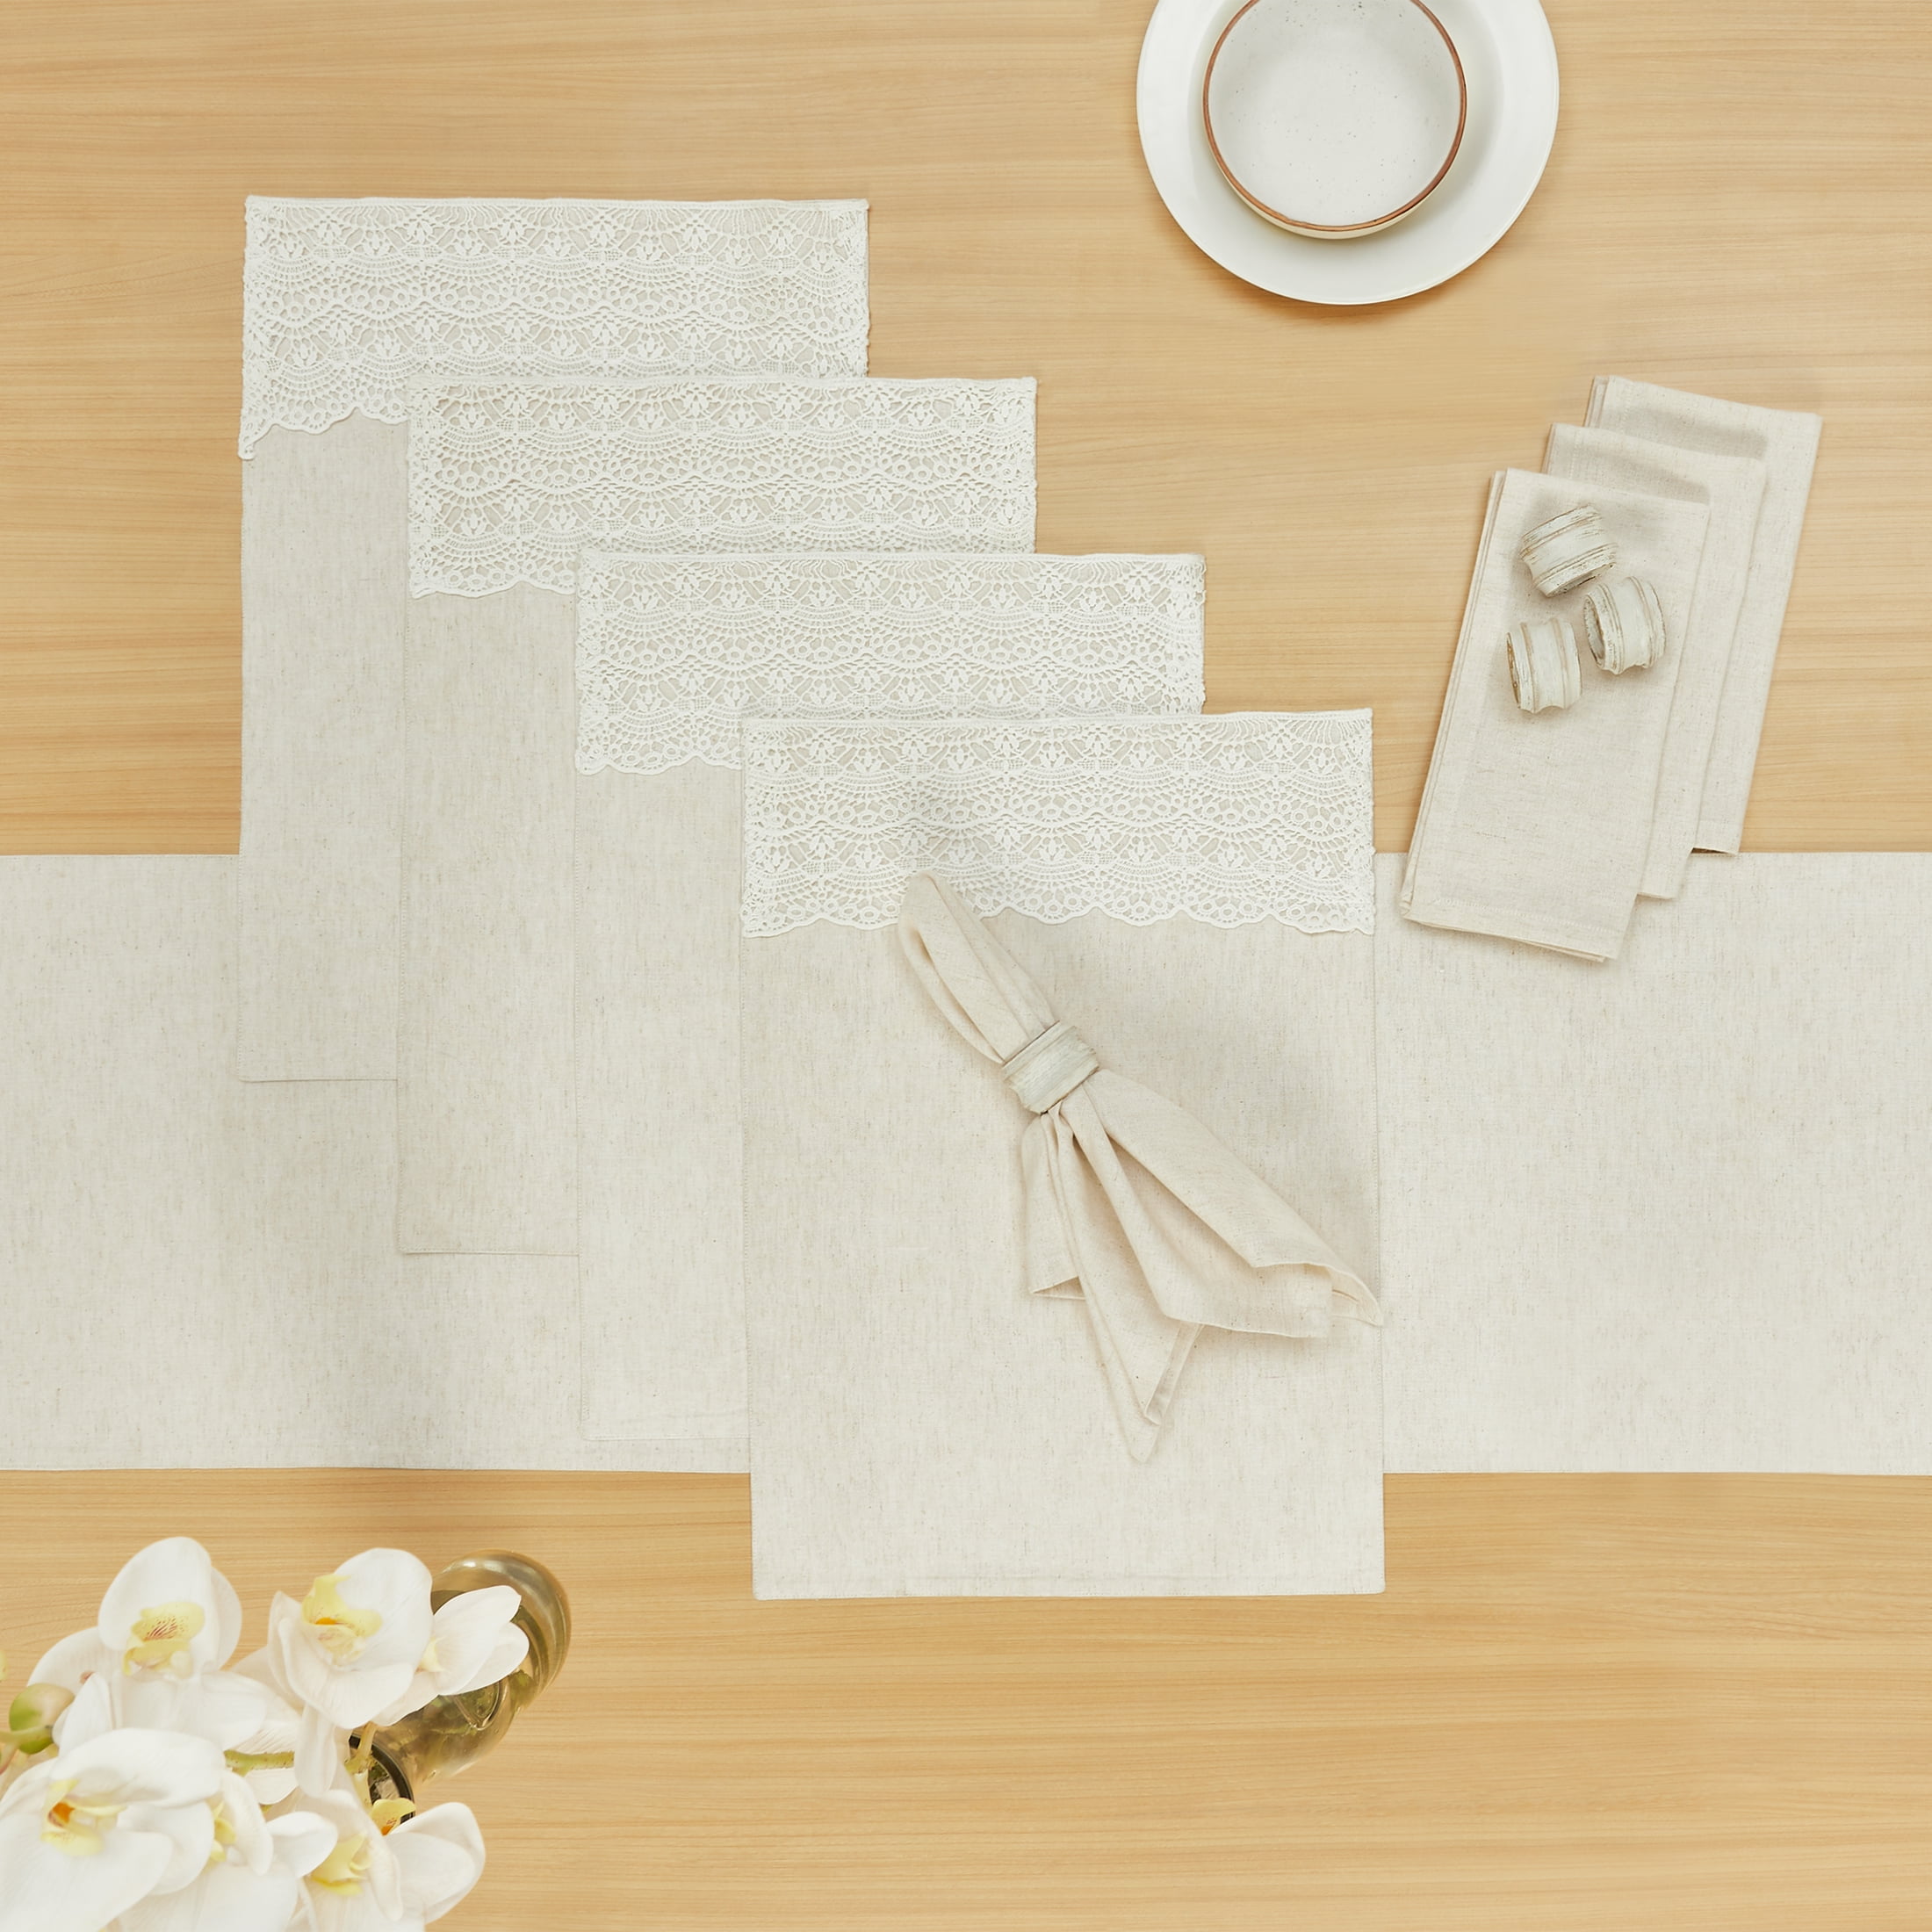 My Texas House Adalee Lace Cotton/Linen 13-Pieces Coordinated Table Runner Dining Set, Beige